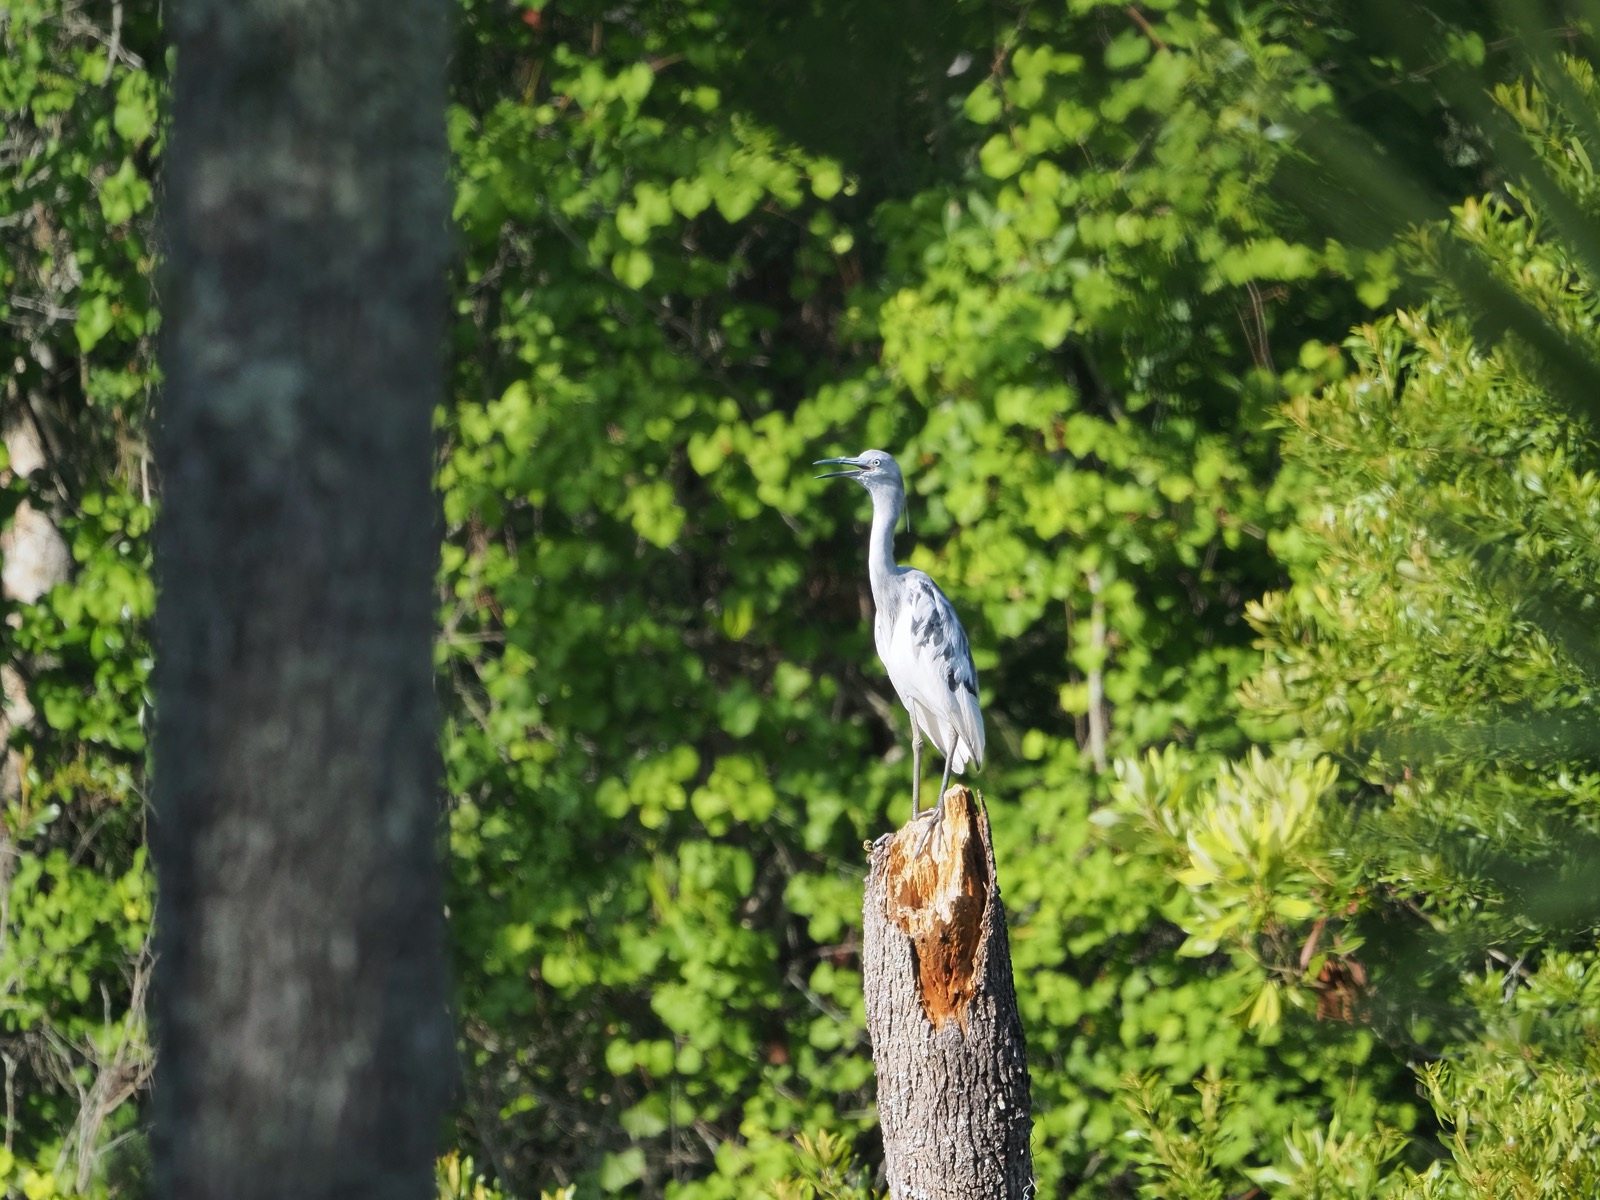 Little blue heron perched on the broken end of a tree trunk